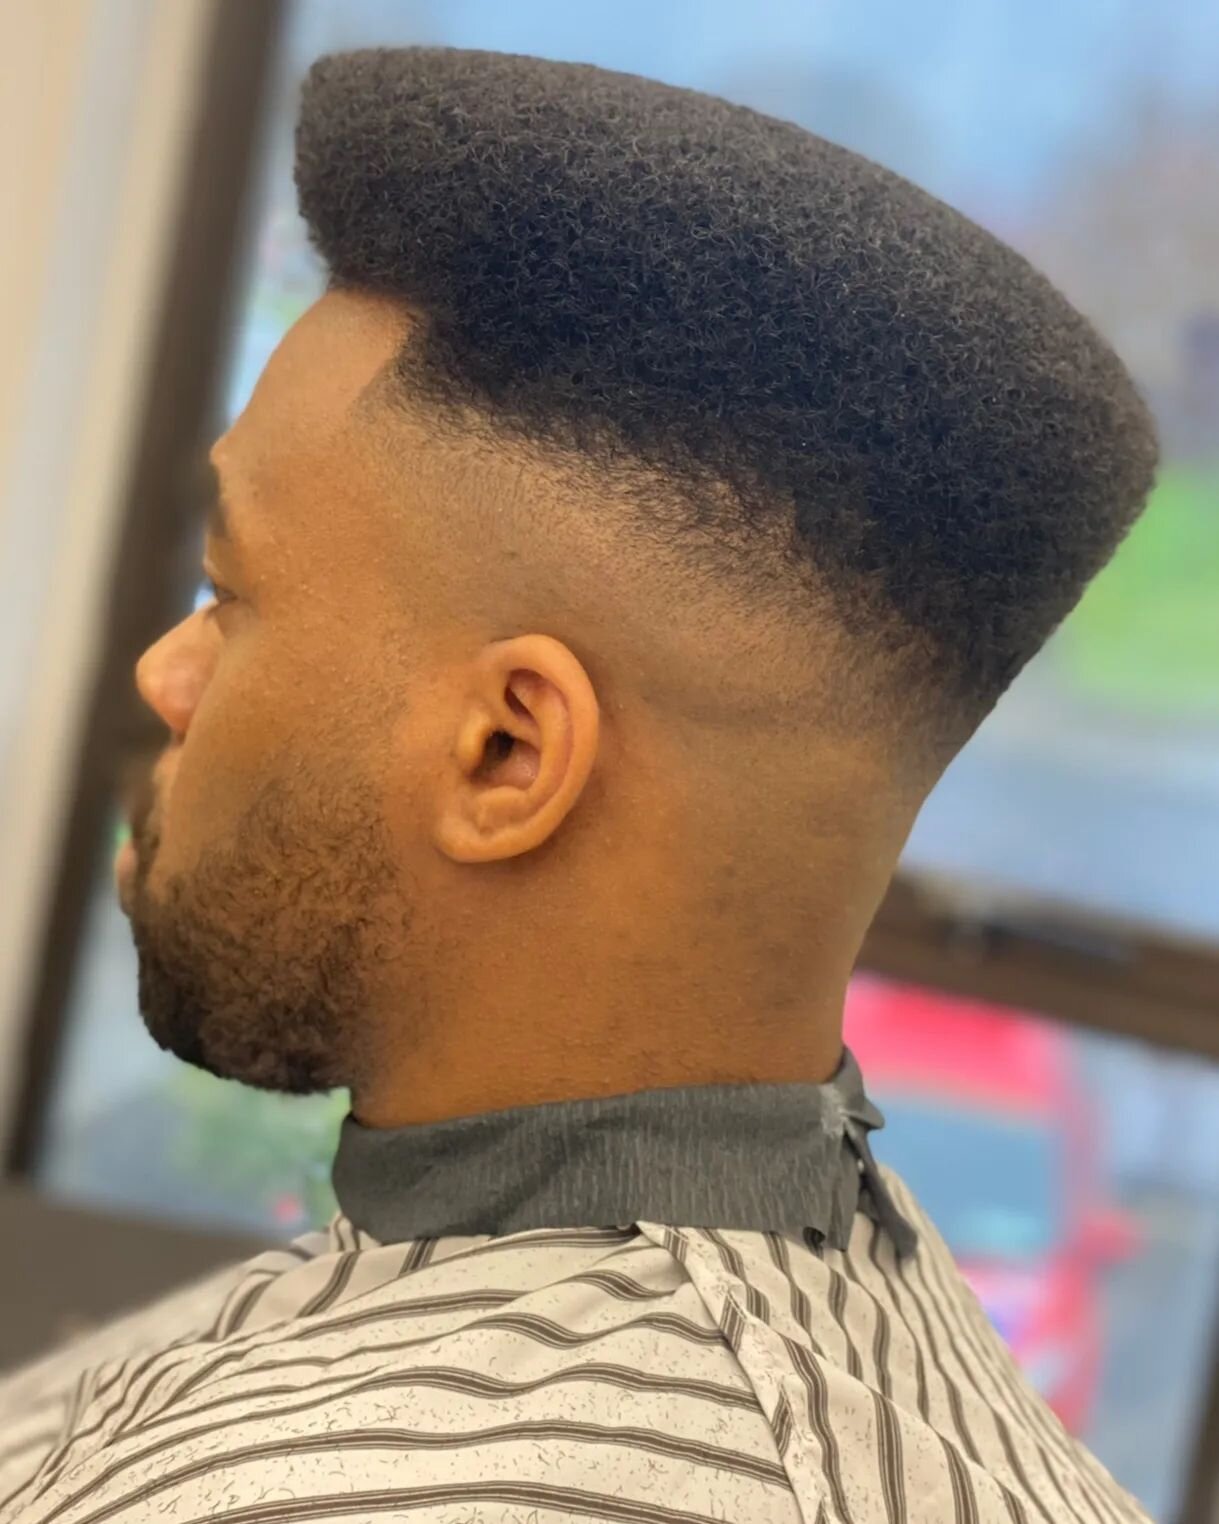 Afro Hair? We got you!
In for a shape up? Line up? 3 step? Low to Hi Fades? Tapers? Designs?
At Fades &amp; Blades we got you covered 😉 

Very own senior barber @henan055 with that master flick of the wrist action making it look too easy.

#barber #